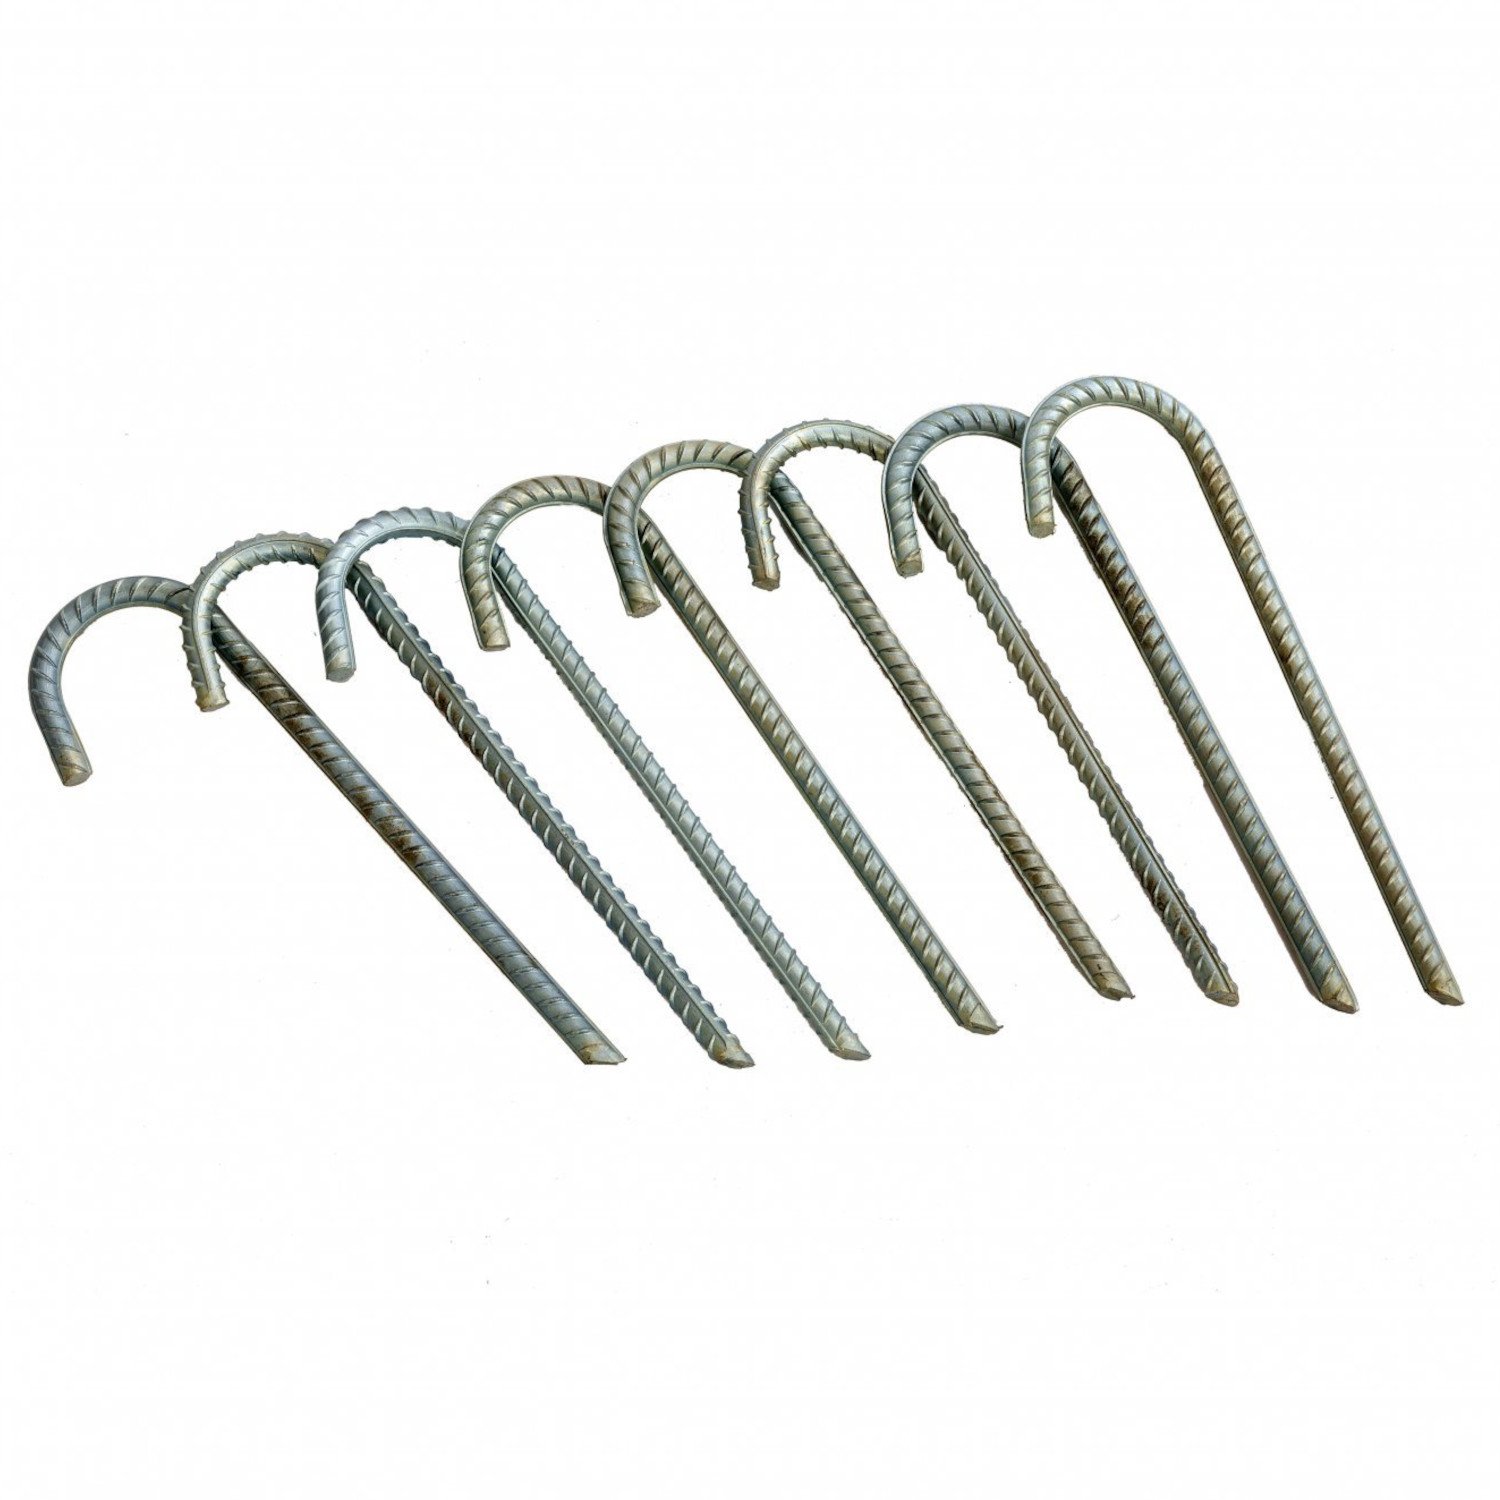 8x Galvanised Steel Ground Stakes Rebar Tent Pegs Garden Pins Anchors - 12 Inch